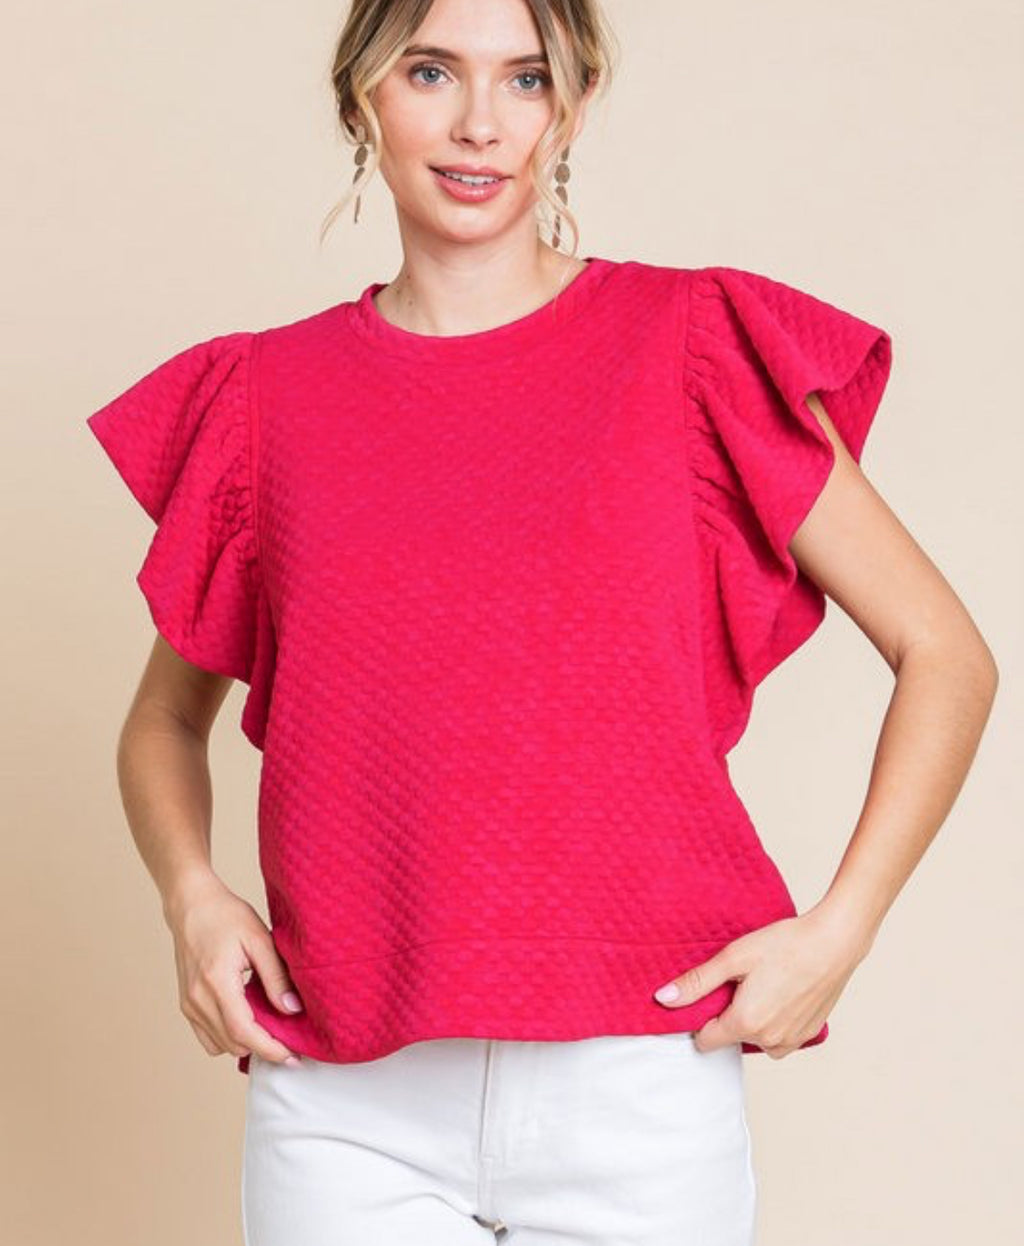 Cranberry knit textured top with ruffled sleeves